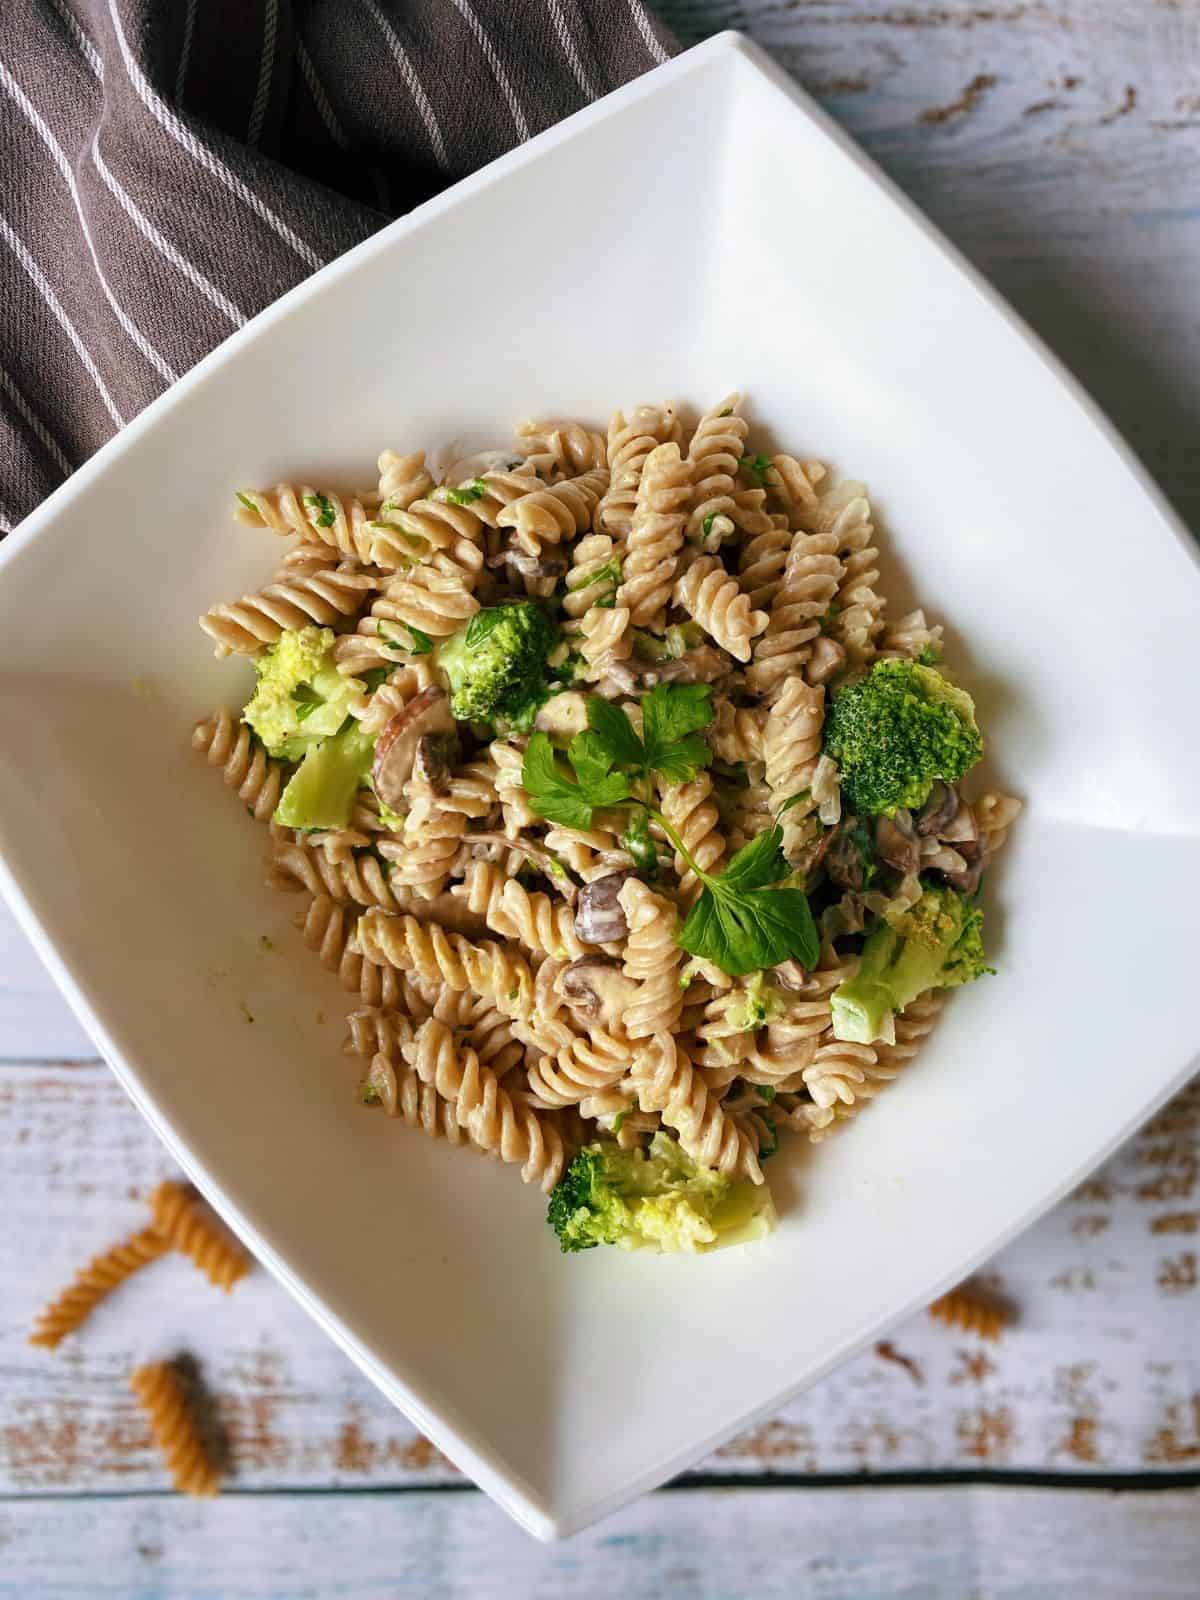 Fusilli pasta with broccoli and mushroom in a white square bowl, garnished with parsley.